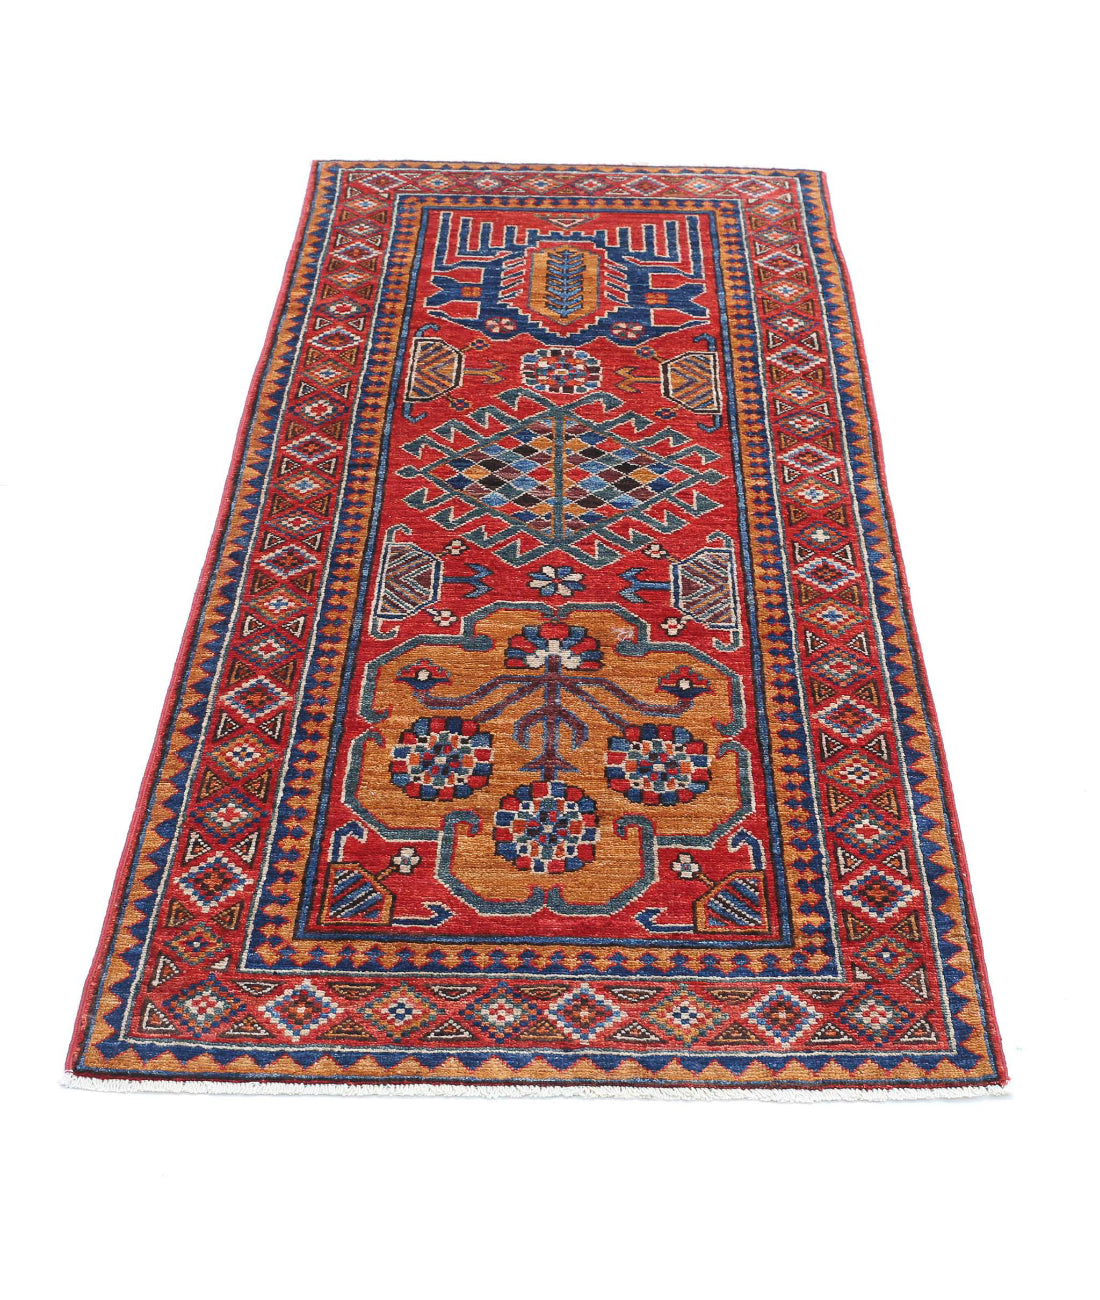 Hand Knotted Nomadic Caucasian Humna Wool Rug - 2'8'' x 5'10'' 2'8'' x 5'10'' (80 X 175) / Red / Taupe